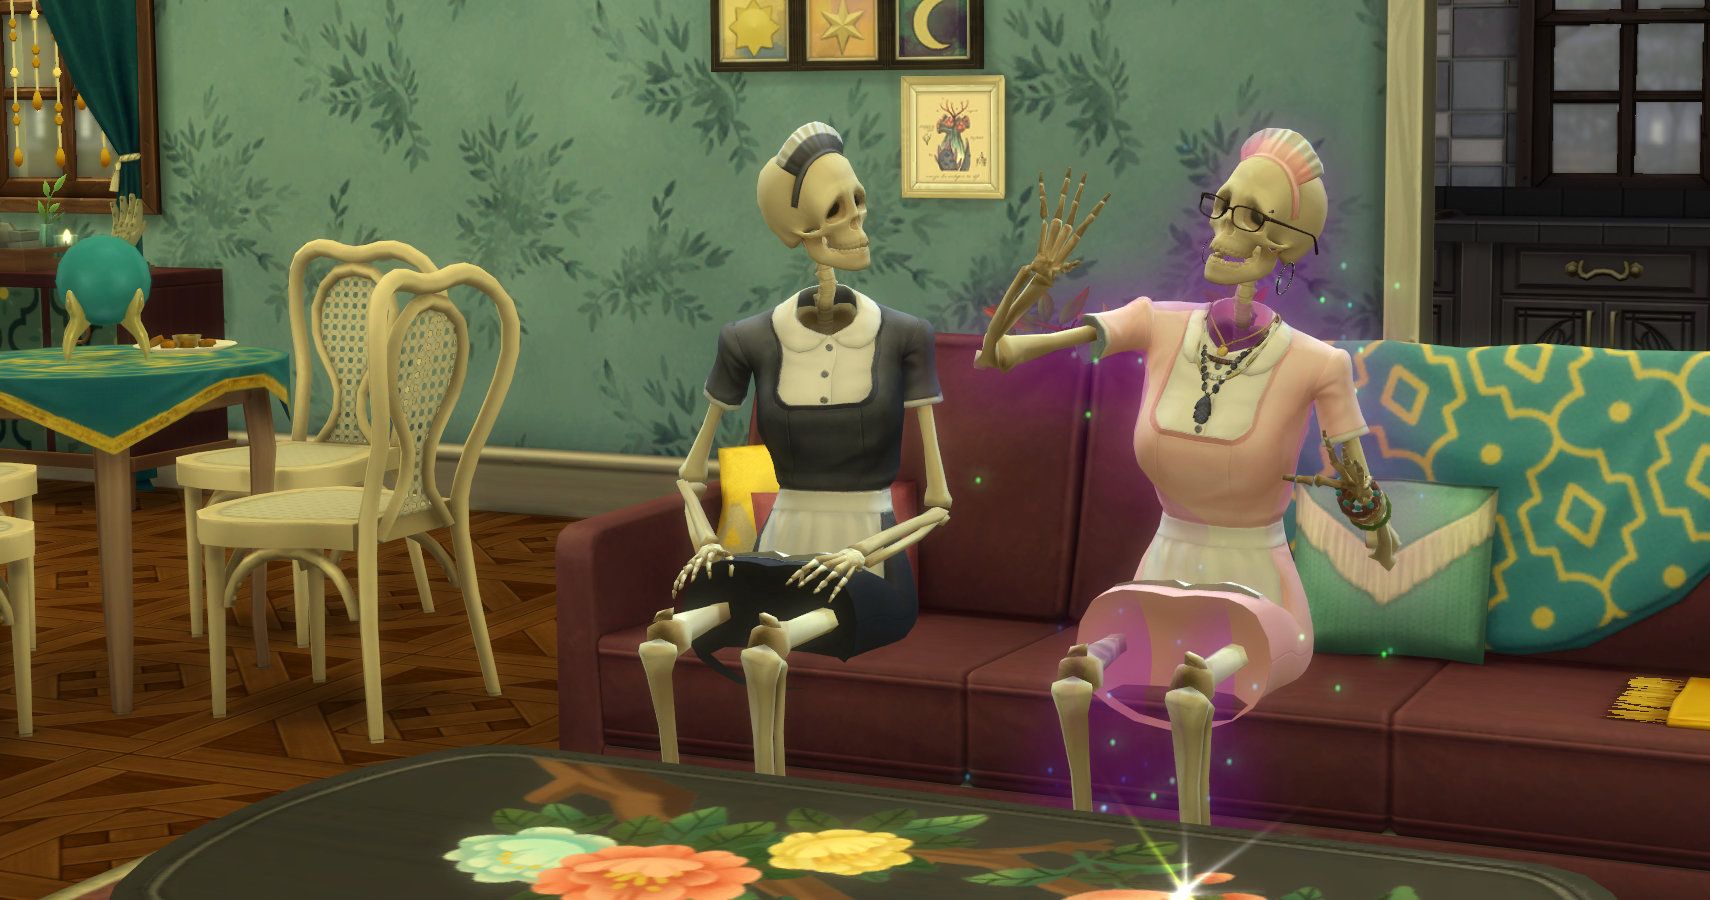 Two Bonehilda's just chilling on a sofa.